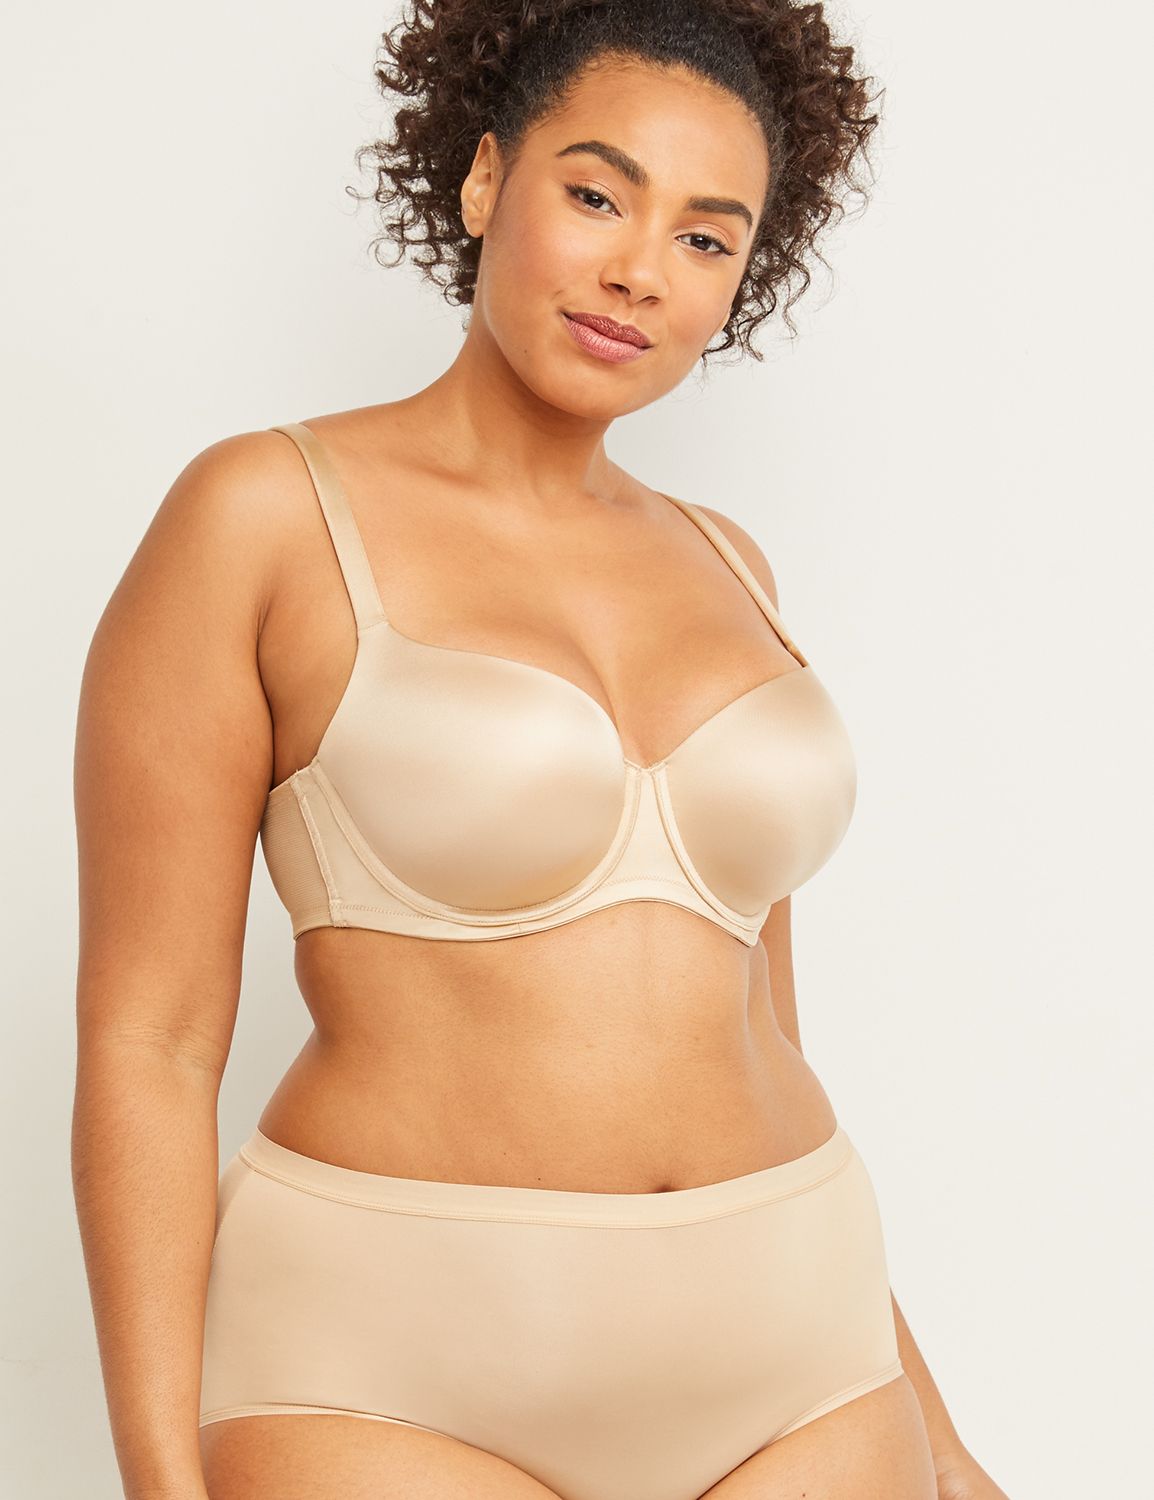 QUYUON Balconette Bra Adjust The Upper Collection Of Auxiliary  Breasts,Thicken Underwear,Daily Bra Active Fit Bras with Support and Lift  Beige 5XL